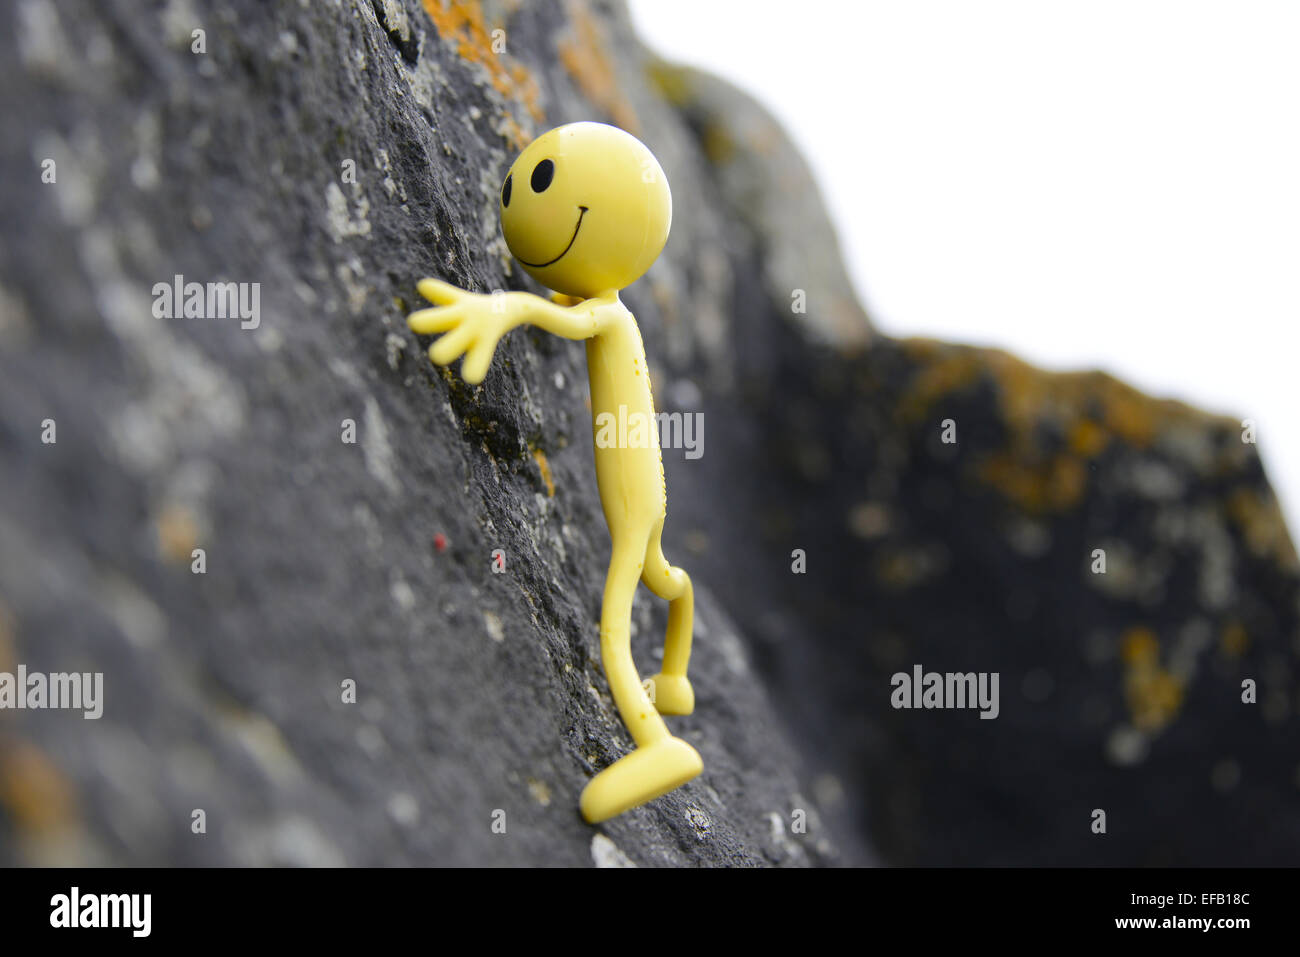 Yellow Smiley Man on holiday in the Outer Hebrides - Here he's engaging in his favourite hobby - rock climbing Stock Photo